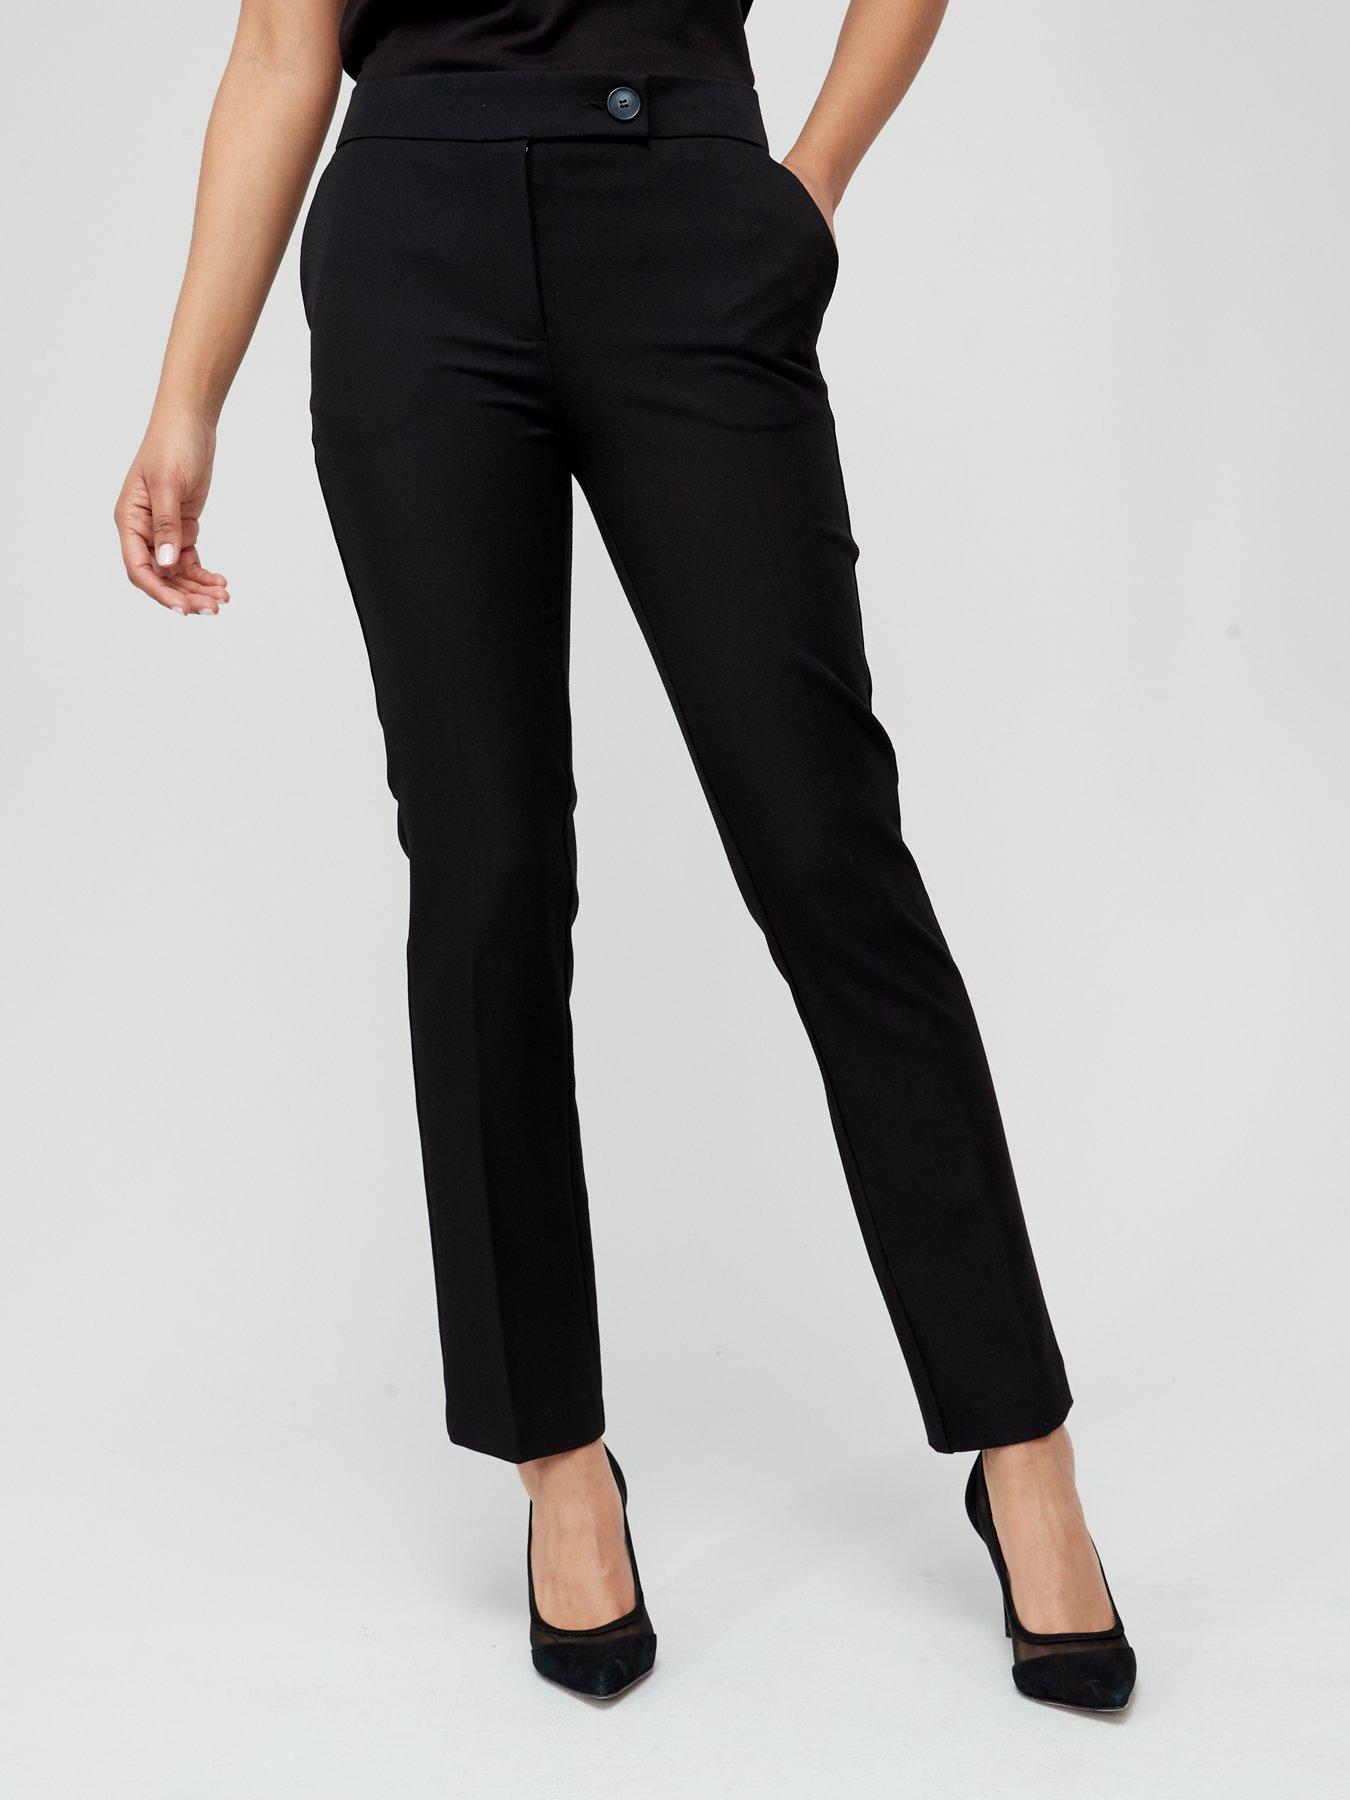 Women's Workwear | Smart trousers, shirts, and more | UNIQLO UK